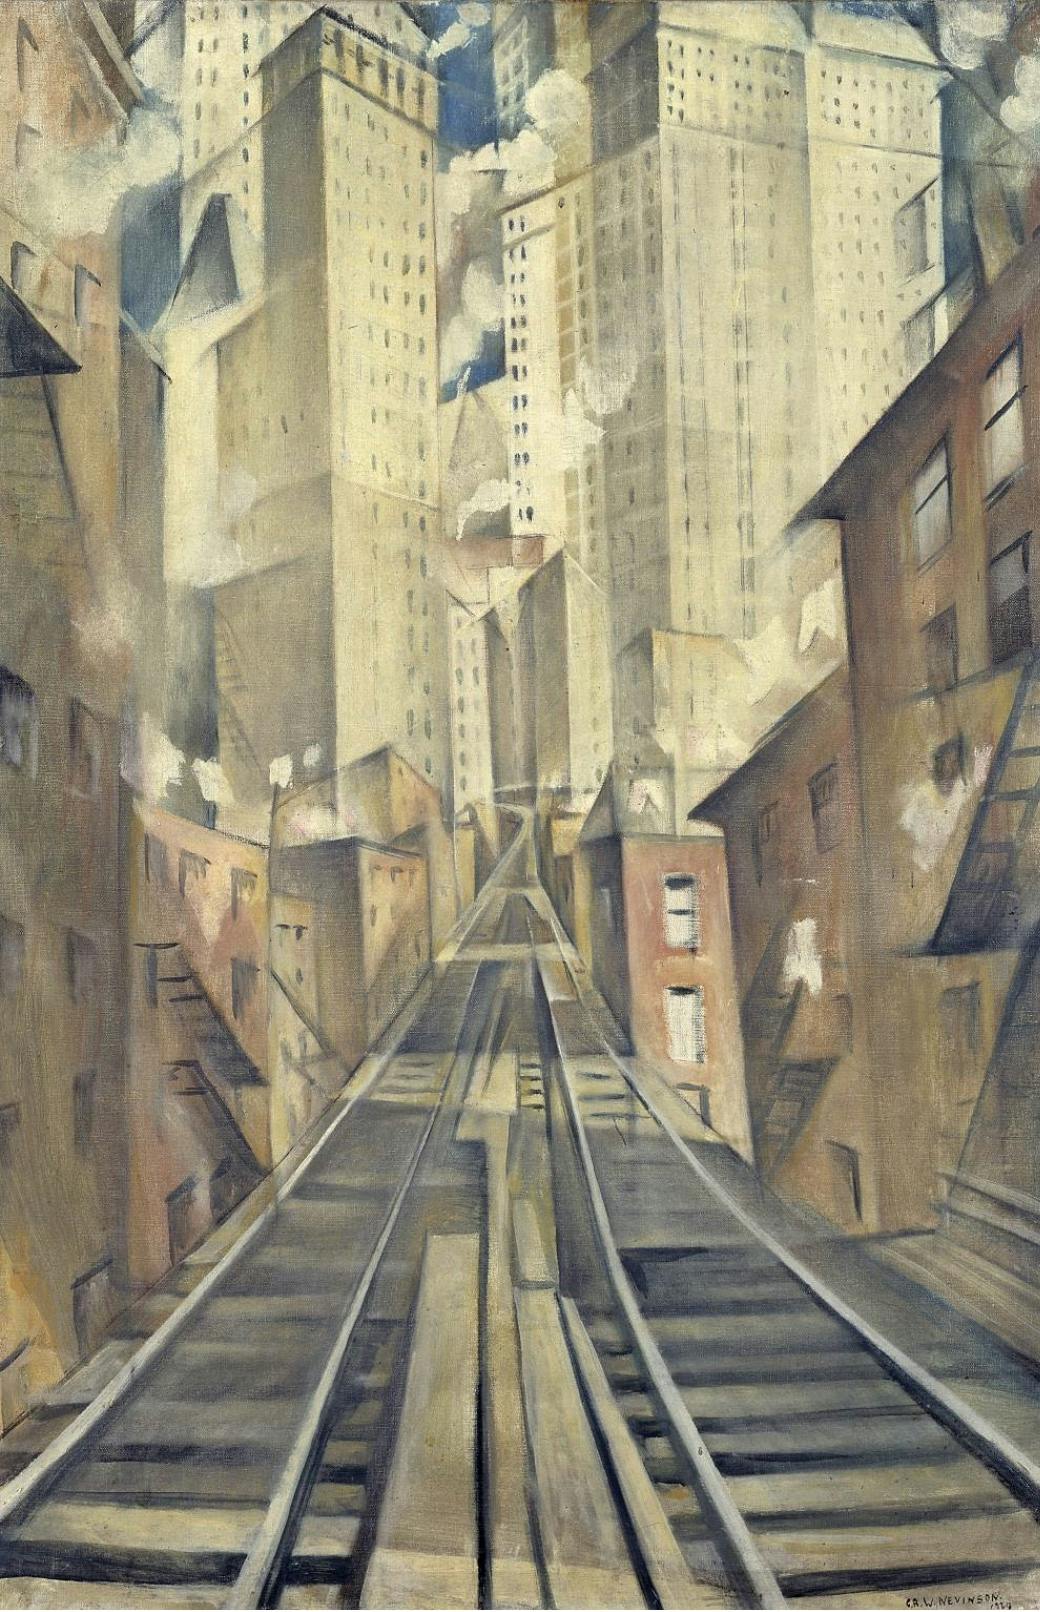 The Soul of the Soulless City by Christopher Richard Wynne Nevinson